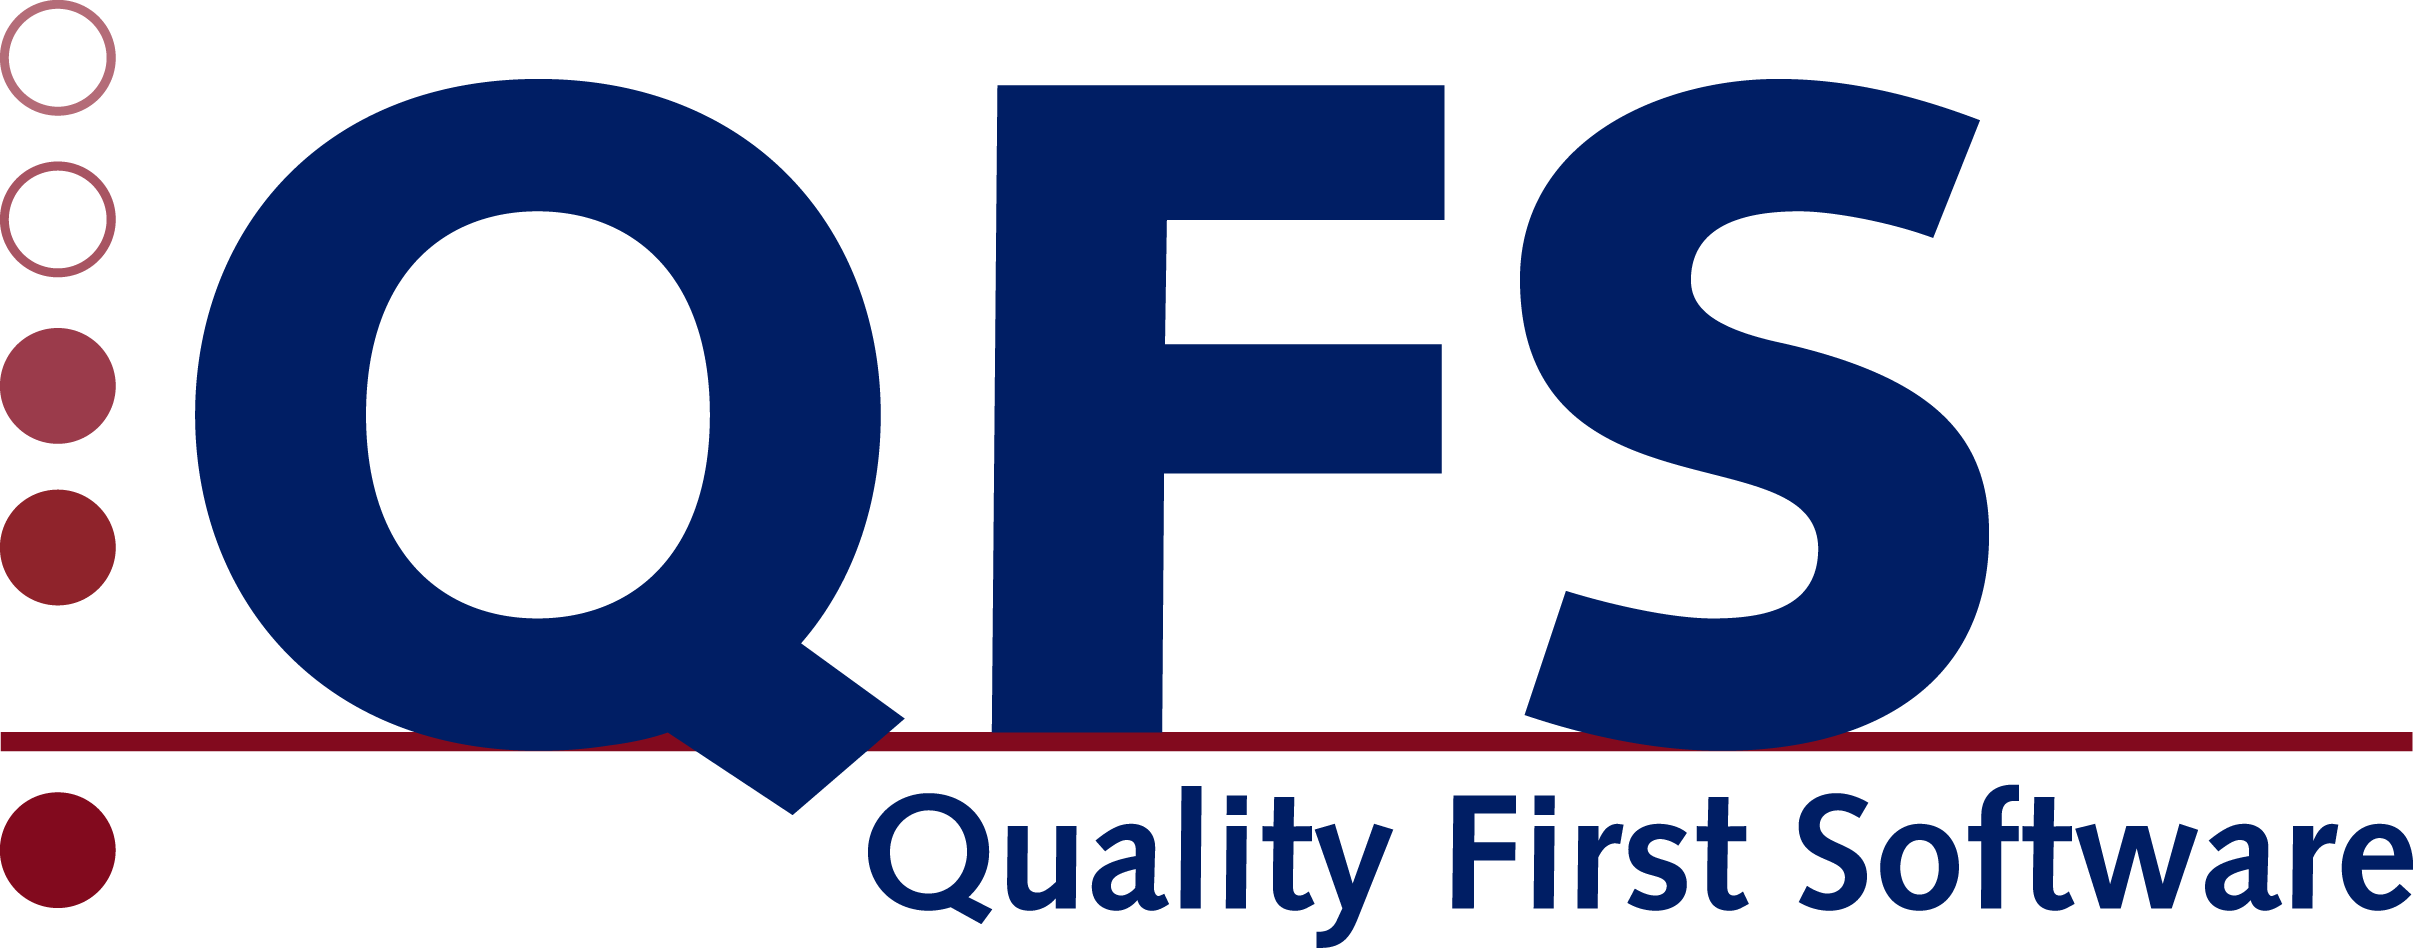 Quality First Software GmbH (QFS)